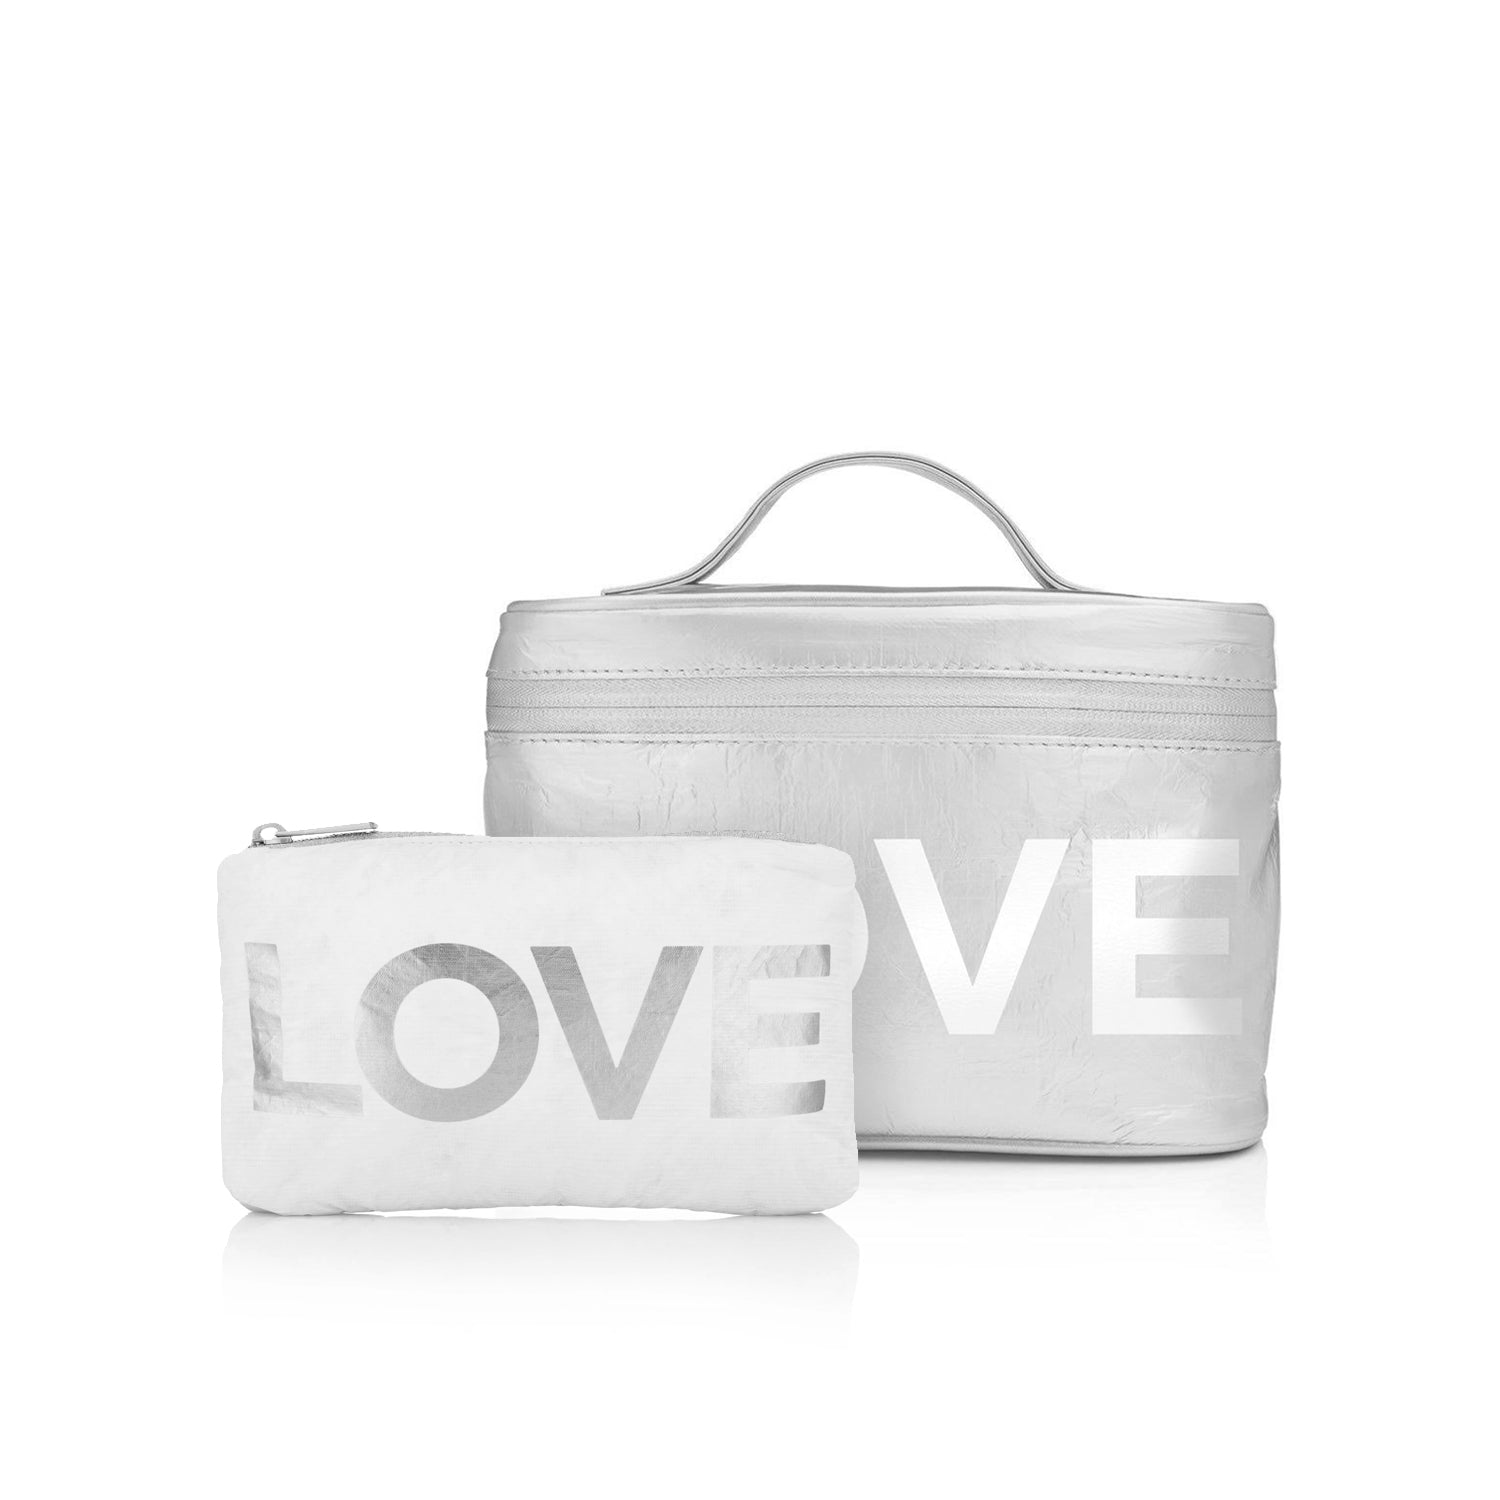 Love Shines Set of Two - Cosmetic Case or Lunch Box and Mini Padded Pack in Silver and White